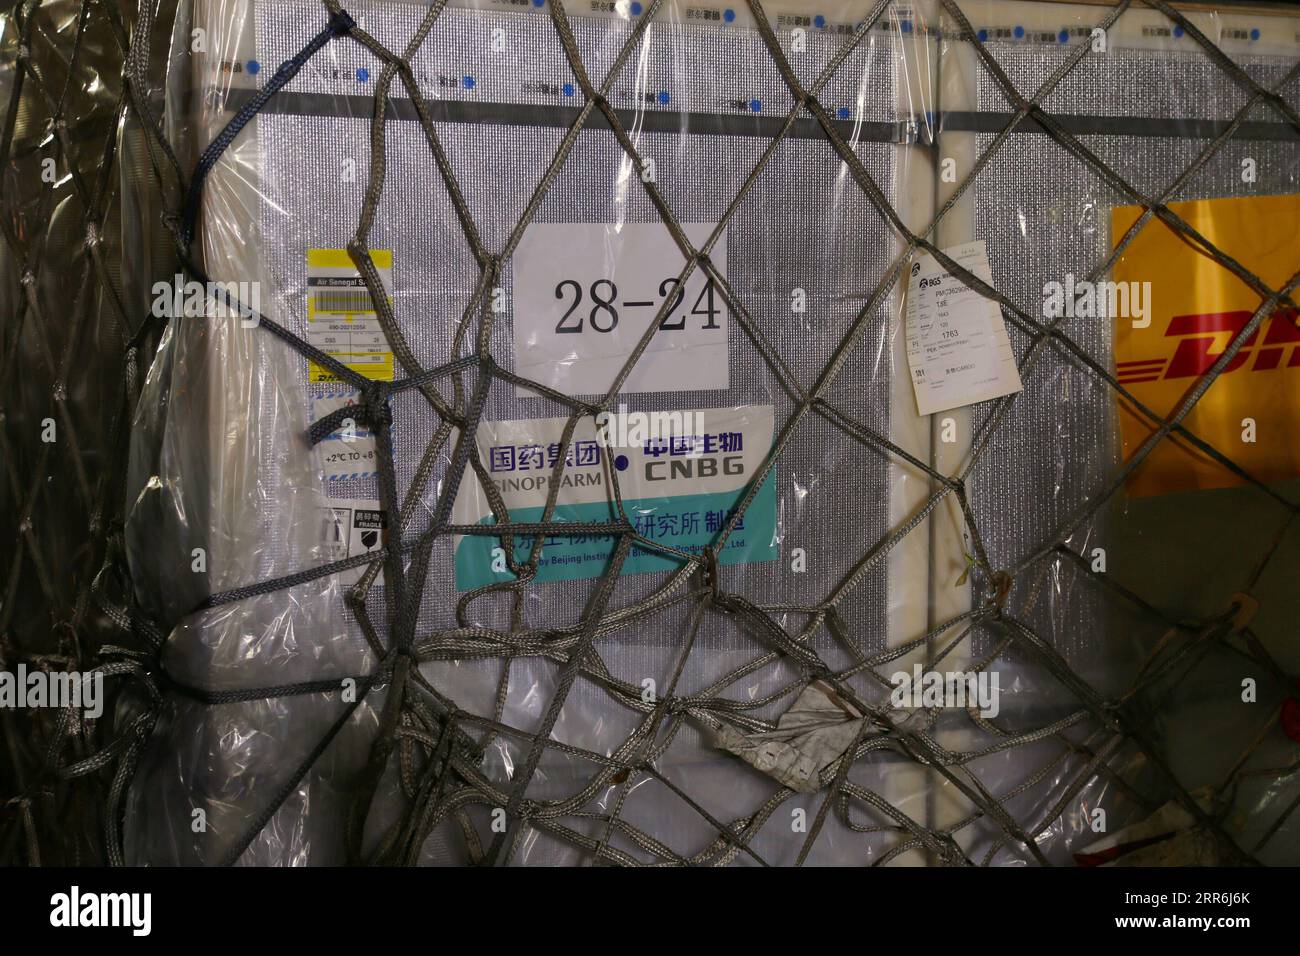 210218 -- DAKAR, Feb. 18, 2021 -- Photo taken on Feb. 17, 2021 shows the first batch of China s Sinopharm COVID-19 vaccine at Blaise Diagne International Airport in Dakar, Senegal. Senegal on Wednesday night received the first batch of China s Sinopharm COVID-19 vaccine.  SENEGAL-DAKAR-CHINESE COVID-19 VACCINE-ARRIVAL XingxJianqiao PUBLICATIONxNOTxINxCHN Stock Photo